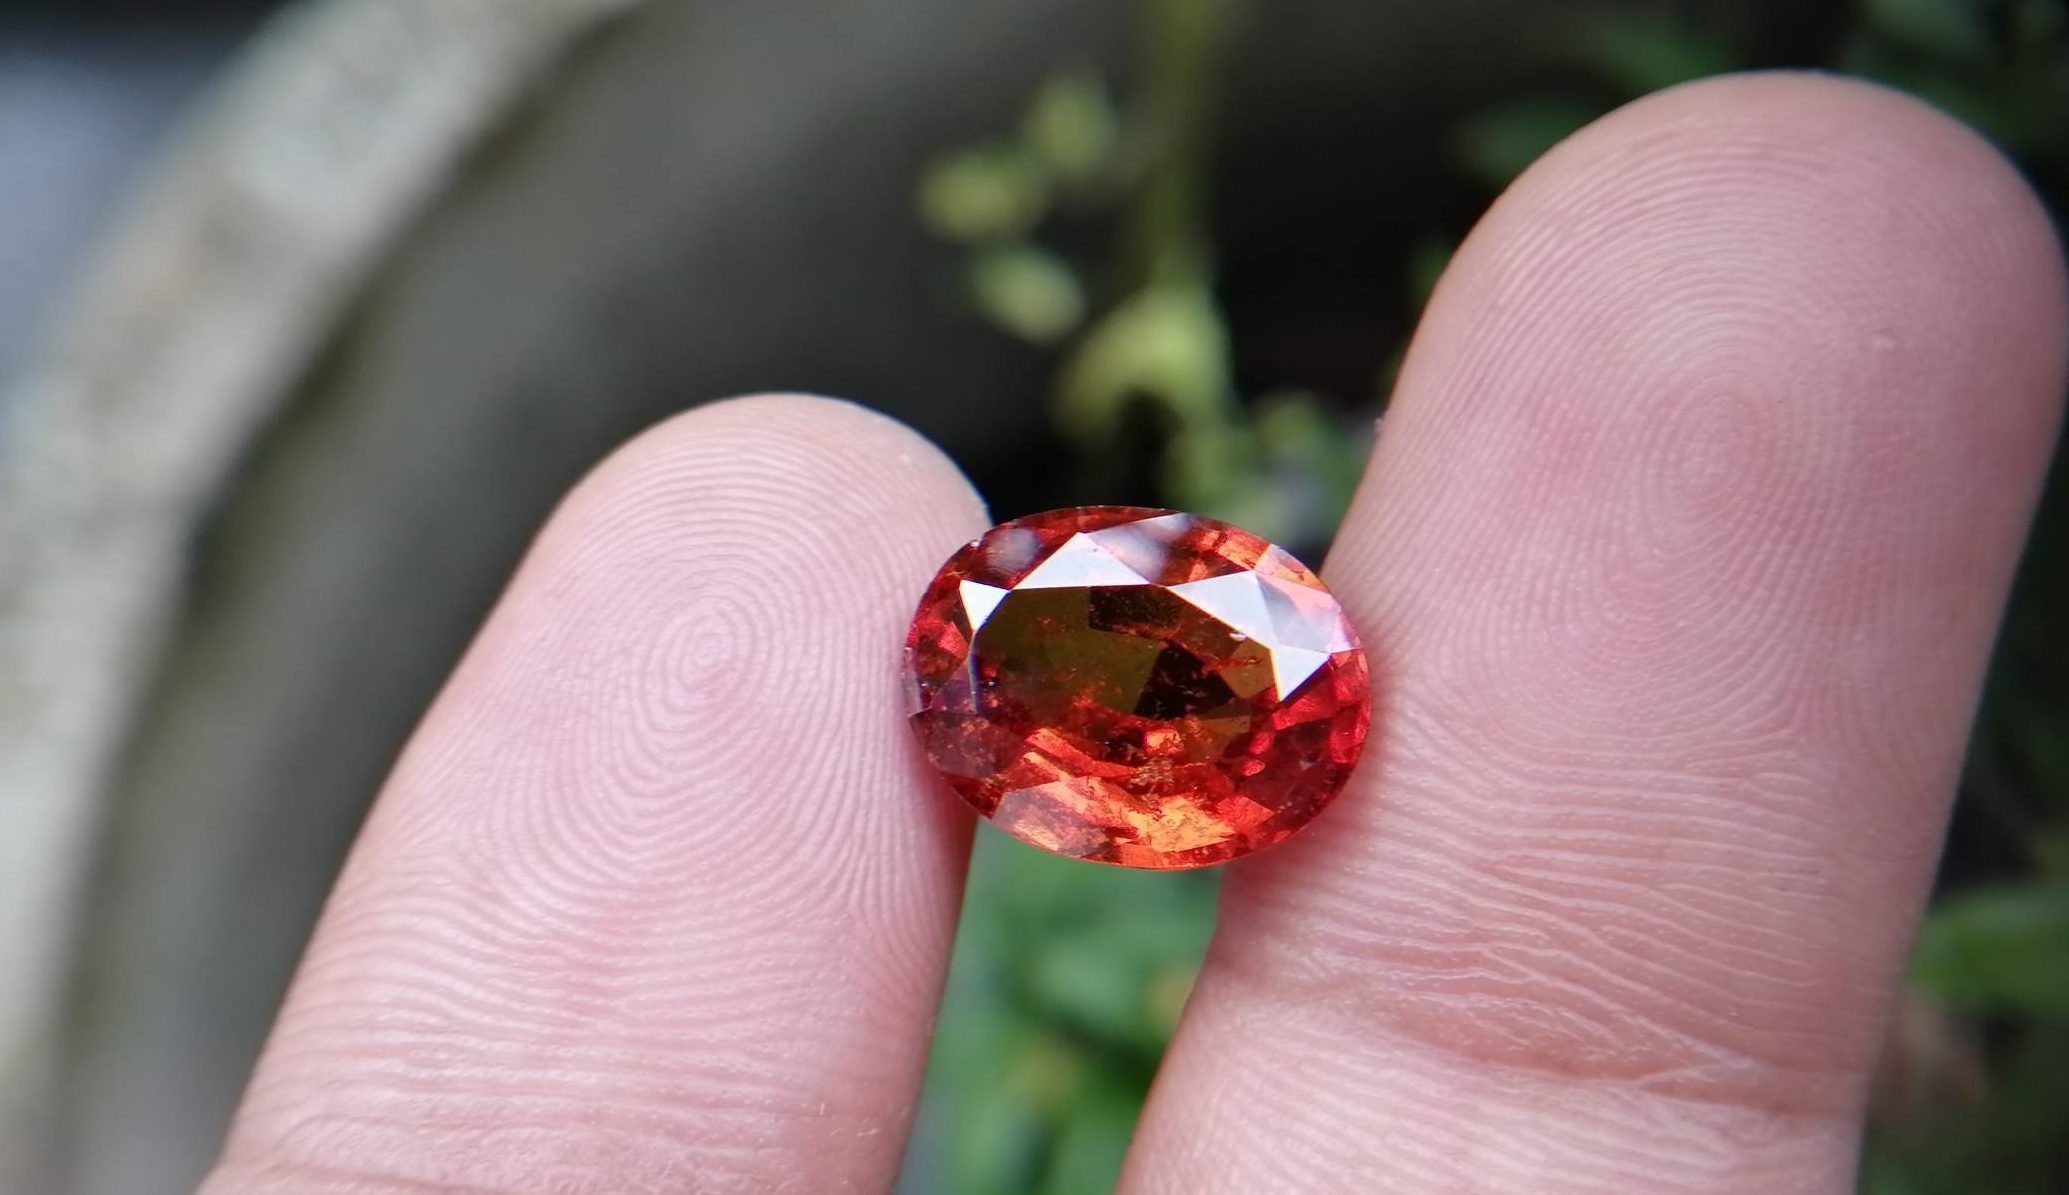 Colour : Reddish-Orange Shape : Oval Weight : 5.85 Cts Dimension : 12.1 x 9.5 x 6.1 mm Treatment : Unheated Clarity : I Hessonite is a calcium aluminum silicate. It is an orangish brown version of grossular garnet that is also known as 'cinnamon stone' because of its color. Hessonite garnet is astrological gem related to Rahu (Moon's ascending node), which is mainly an elemental and instinctual entity. When badly positioned, this "shadow planet" is characterized by insatiable recognitions and desires together with sense gratification. This stone can also be used to treat various skin infections, as well as fear psychosis and multiple personality disorders.                                                          Hessonite Garnet will also help you deal with issues of sexuality or lack of emotional balance                                                                                             Garnets are a group of silicate minerals. All species of garnets possess similar physical properties and crystal forms but differ in chemical composition Such as Pyrope Mg3Al2Si3O12, Almandine Fe3Al2Si3O12, Spessartine Mn3Al2Si3O12, Andradite Ca3Fe2Si3O12, Grossular Ca3Al2Si3O12, Uvarovite Ca3Cr2Si3O12. Most Garnets have a variable magnetic attraction. This characteristic also uses to identify garnet. Pyrope - almandine - spessartine and uvarovite - grossular - andradite is two solid solution series of garnets. This nesosilicates mineral Specific gravity is 3.1–4.3 with 6.5–7.5 hardness according to the Mohs hardness scale. Garnets don't have Pleochroism, It's a single Reflective Stone in gemstone families. Garnet has many kinds of color such as Red, Purple, Green, Yellow, Orange, pink, Colour Change, Blue, Brown, Black, Colourless. Blue Garnet is very rare. In history, Red garnets were the most commonly used gemstones. In industrial, Garnet sand is a good abrasive, and a common replacement for silica sand in sandblasting. Garnet is found in Sri Lanka, Tanzania, Madagascar, Ethiopia, USA, France, Germany, Mexico, Norway, Russia, Turkey, Zimbabwe, Australia, Austria, Canada. Garnet is the traditional birthstone of those born in January and the birthstone of Aquarius in astrology. Healing Properties of Garnet 👇  This nesosilicates Gemstone cleanses and re-energizes the chakras. Garnet Associates with Base and Heart Chakra and regenerates the body and stimulates the metabolism. Garnet regenerates the body, stimulating metabolism. Garnet treats spinal and cellular disorders, purifies the blood, heart, and lungs, and regenerates DNA and assists assimilation of minerals and vitamins Such as iodine, calcium, magnesium, and Vitamins A, D, and E. [ Vitamins and Minerals Guide ]